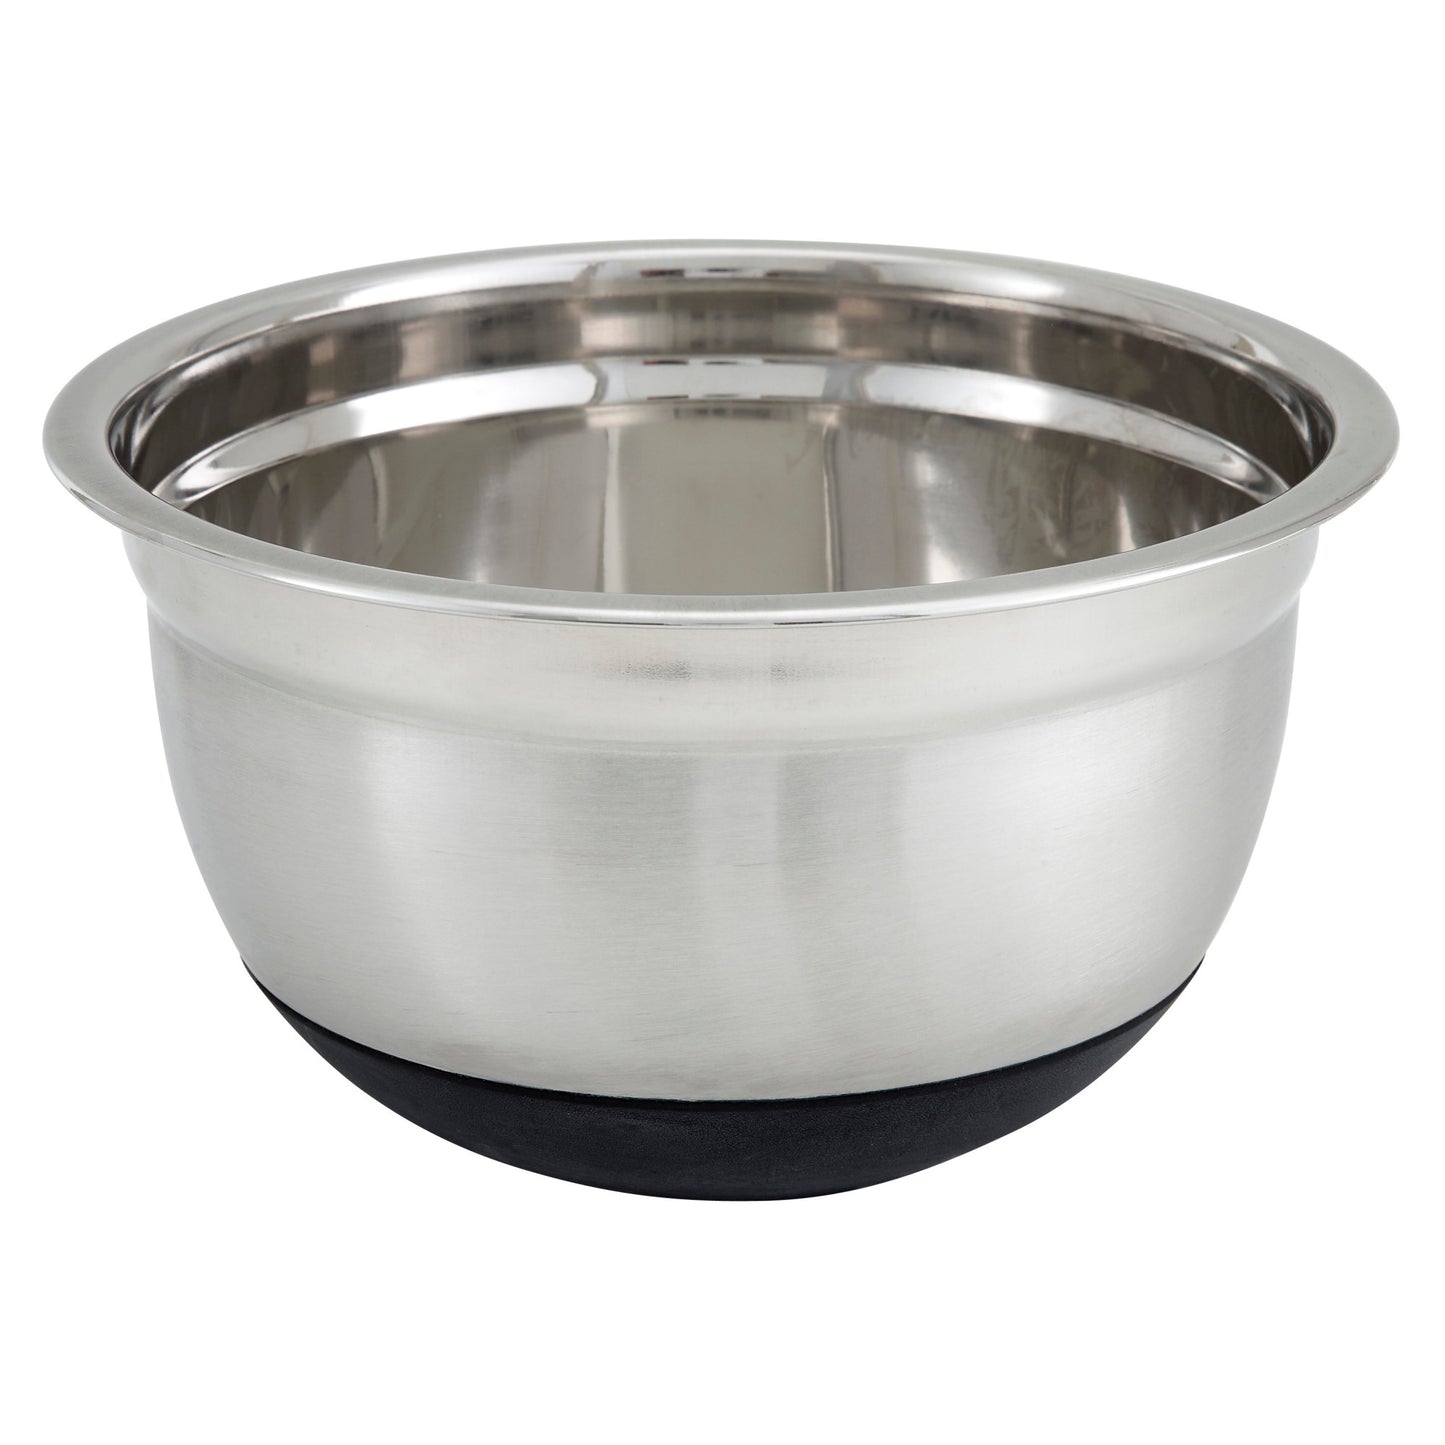 Mixing Bowl, Silicone Base, Stainless Steel - 1-1/2 Quart